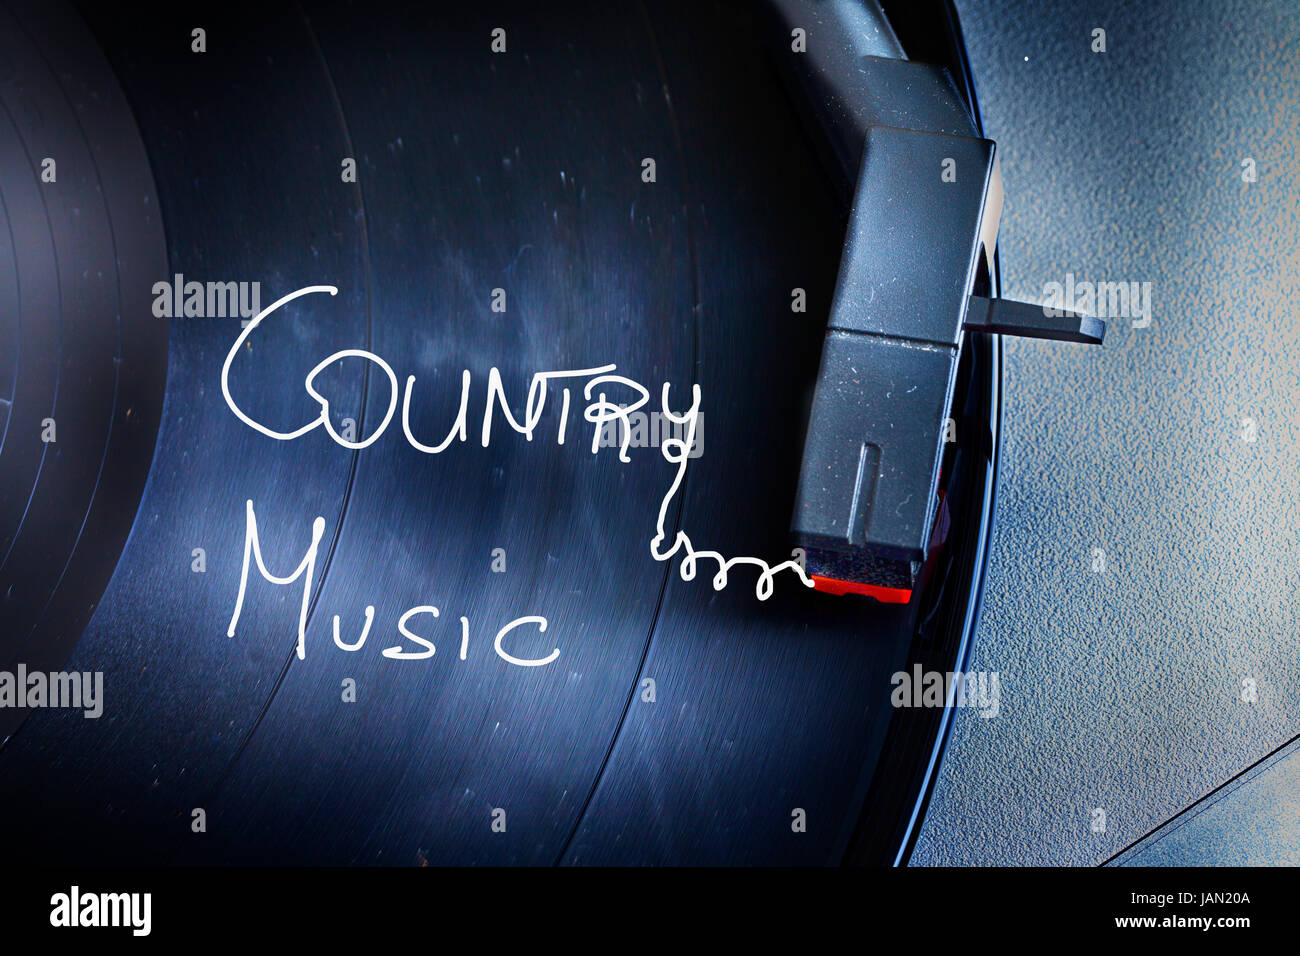 Old and dusty turntable with old vynil seen from above with words 'Country music' Stock Photo